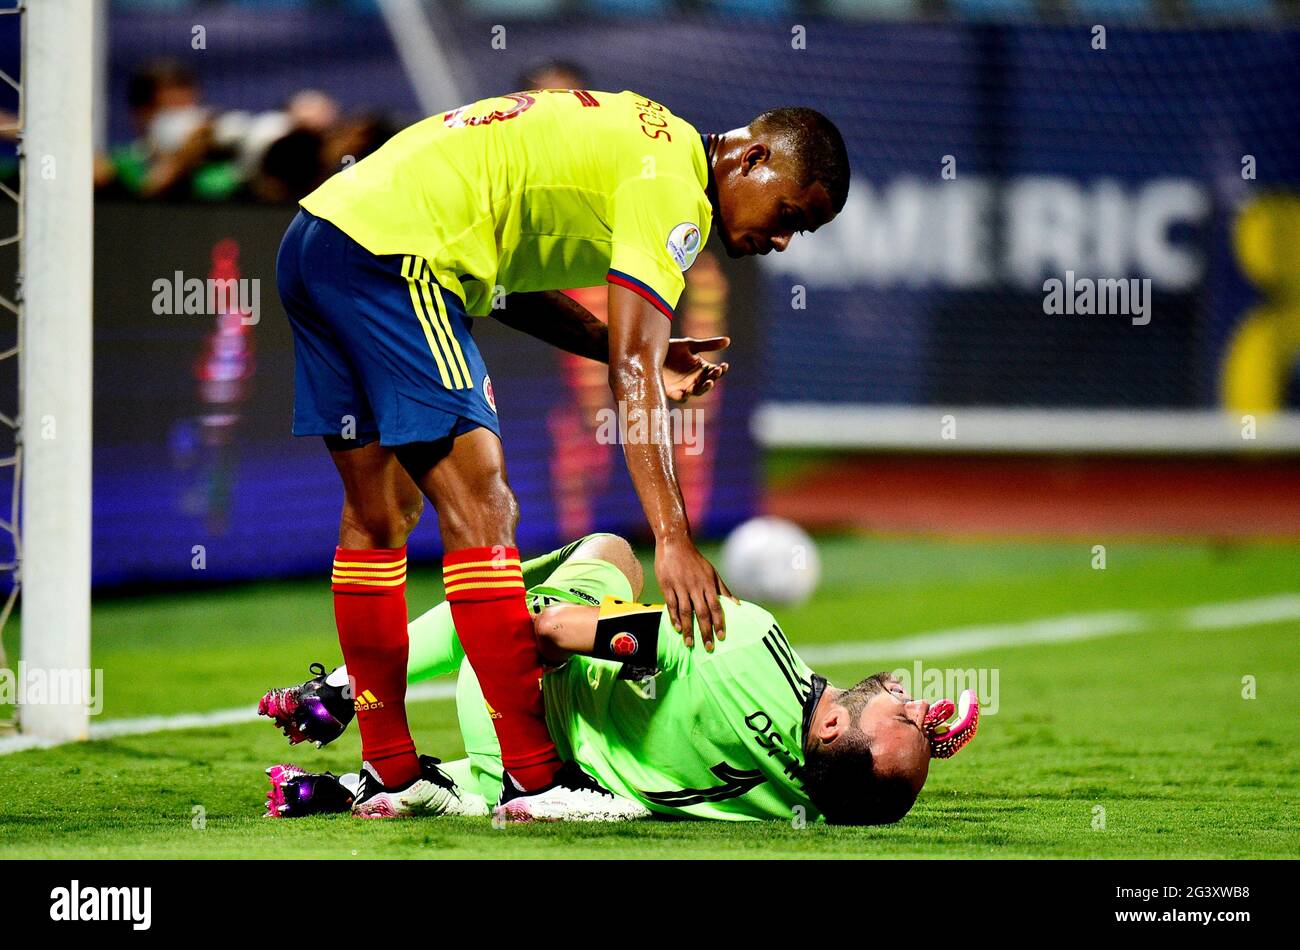 GOIANIA, BRAZIL - JUNE 17: David Ospina of Colombia Injuried ,during the match between Colombia and Venezuela as part of Conmebol Copa America Brazil 2021 at Estadio Olimpico on June 17, 2021 in Goiania, Brazil. (Photo by MB Media) Stock Photo